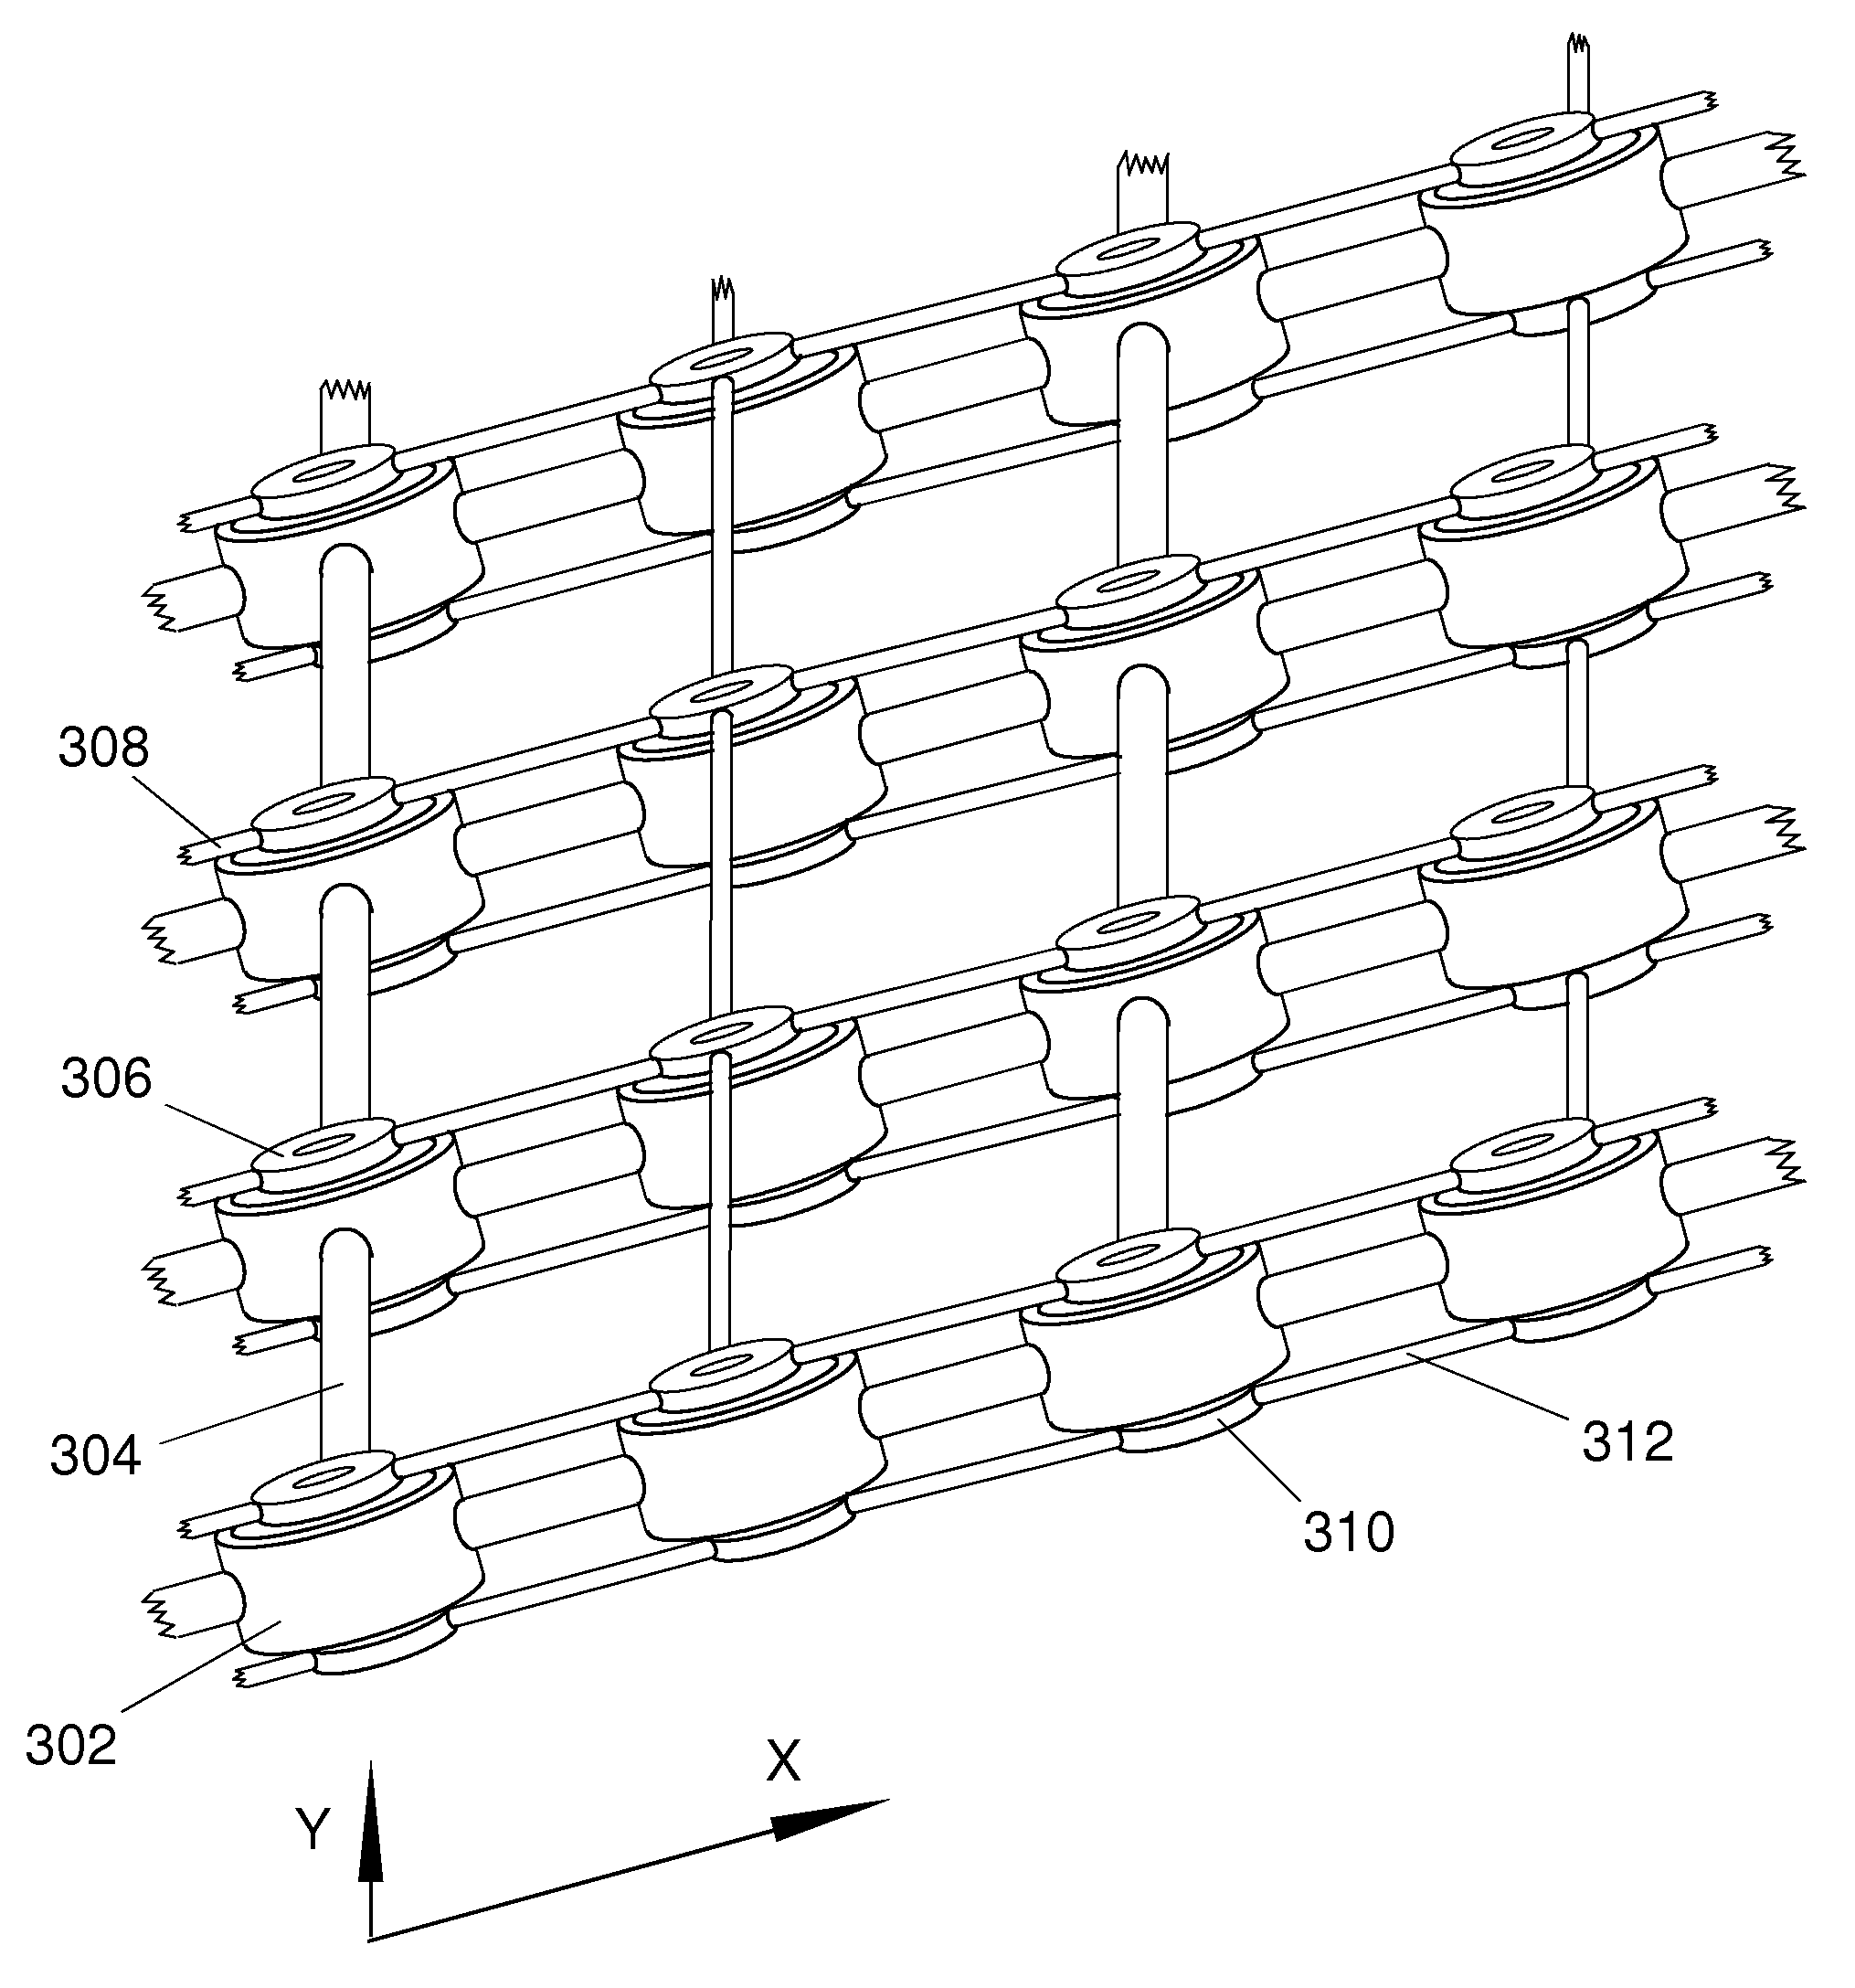 Apparatus and Methods for Controlling Miniaturized Arrays of Ion Traps